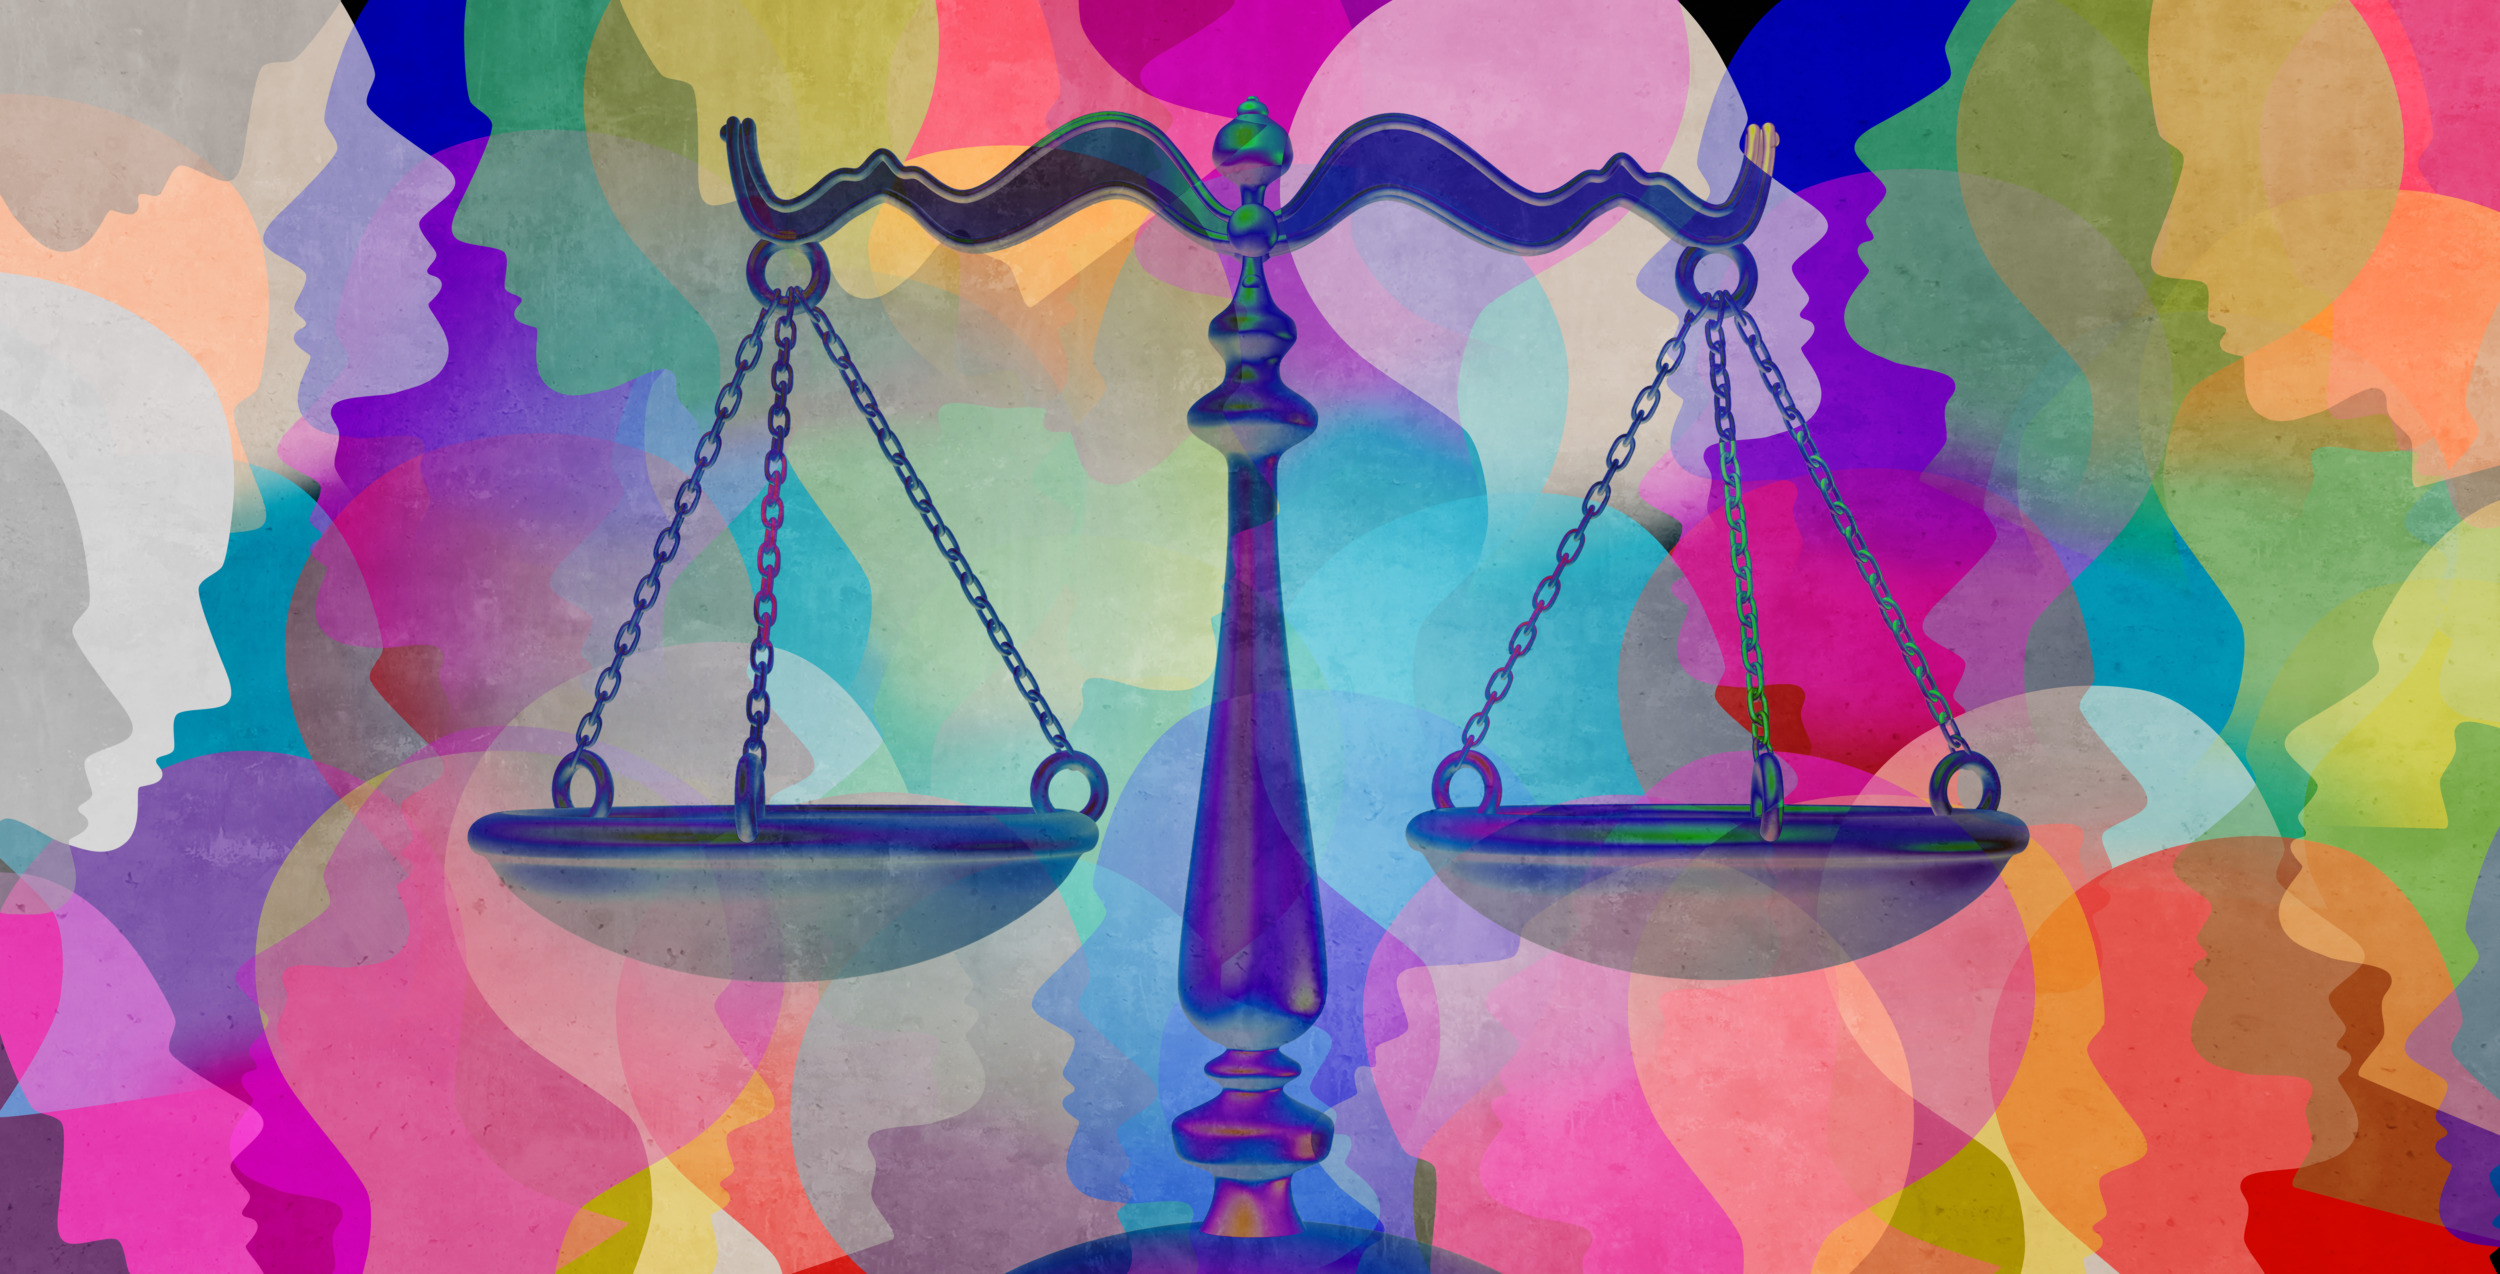 Justice: Scales of justice in front of multi-colored illustration of overlapping profiles of people.